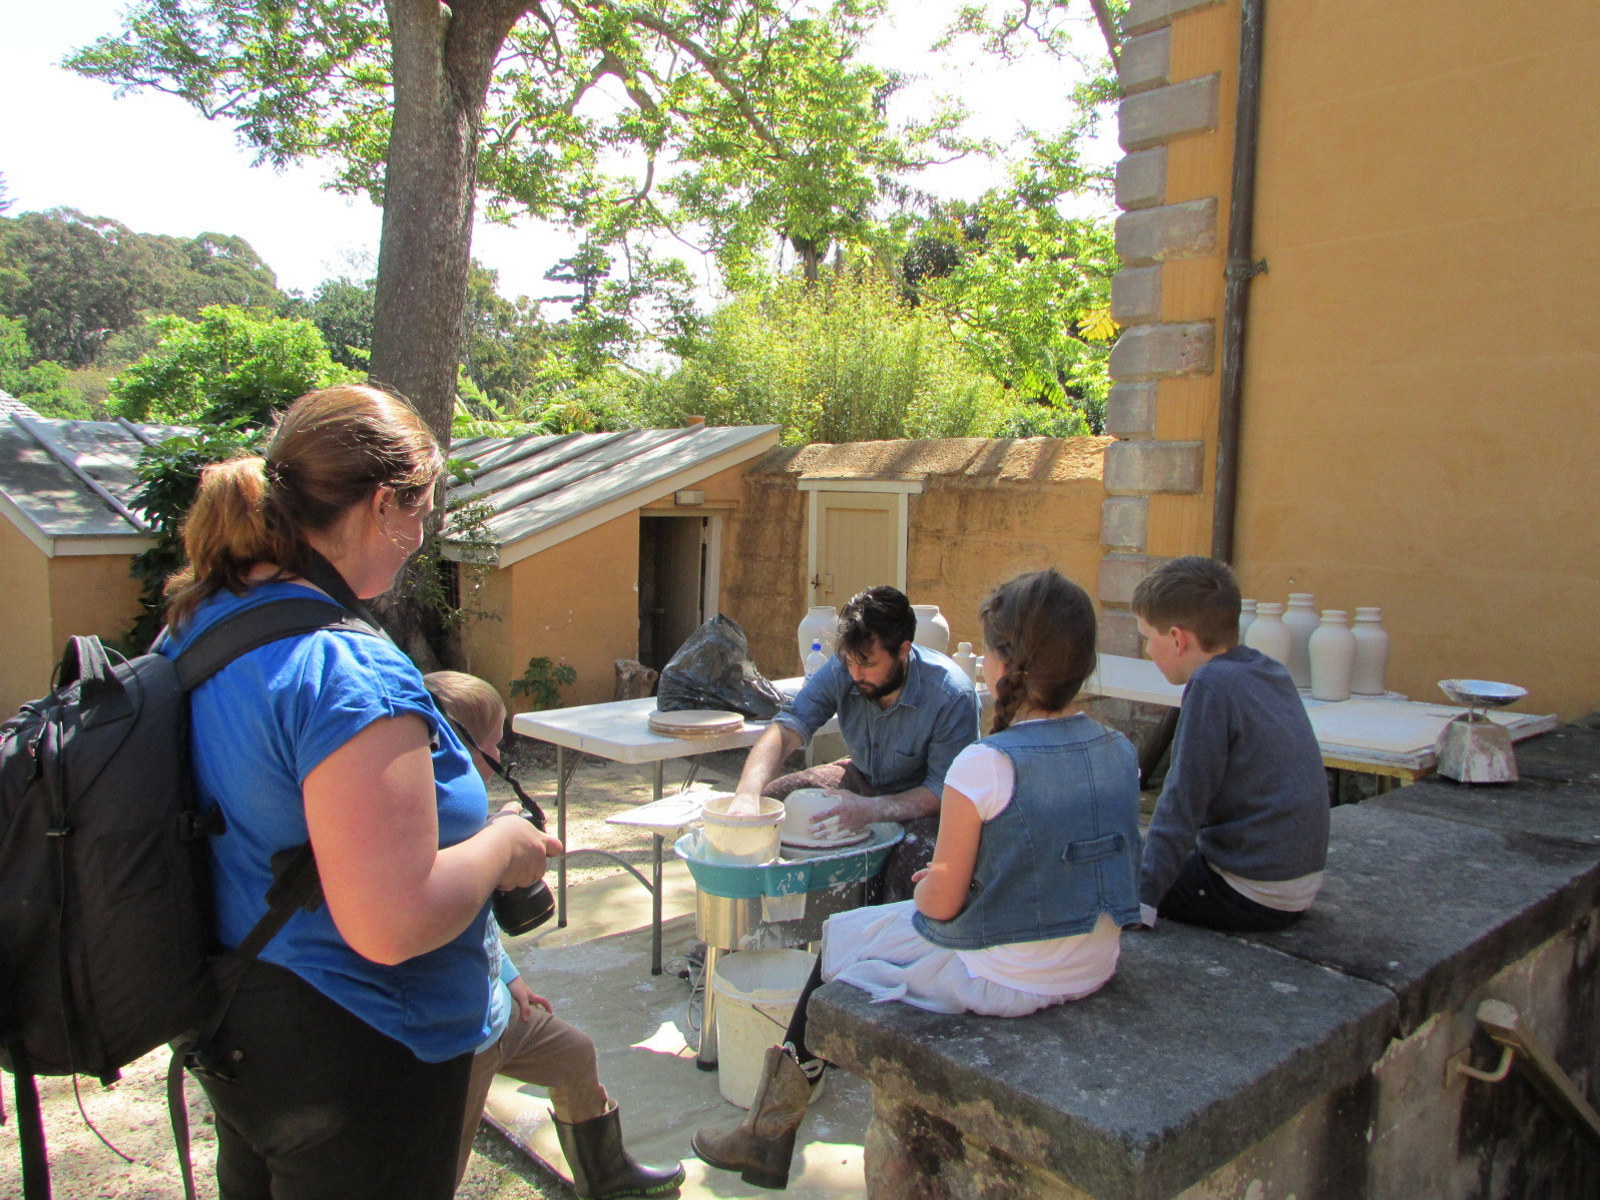 Artist in residence at work on the potters wheel in the stone walled courtyard of vaucluse house